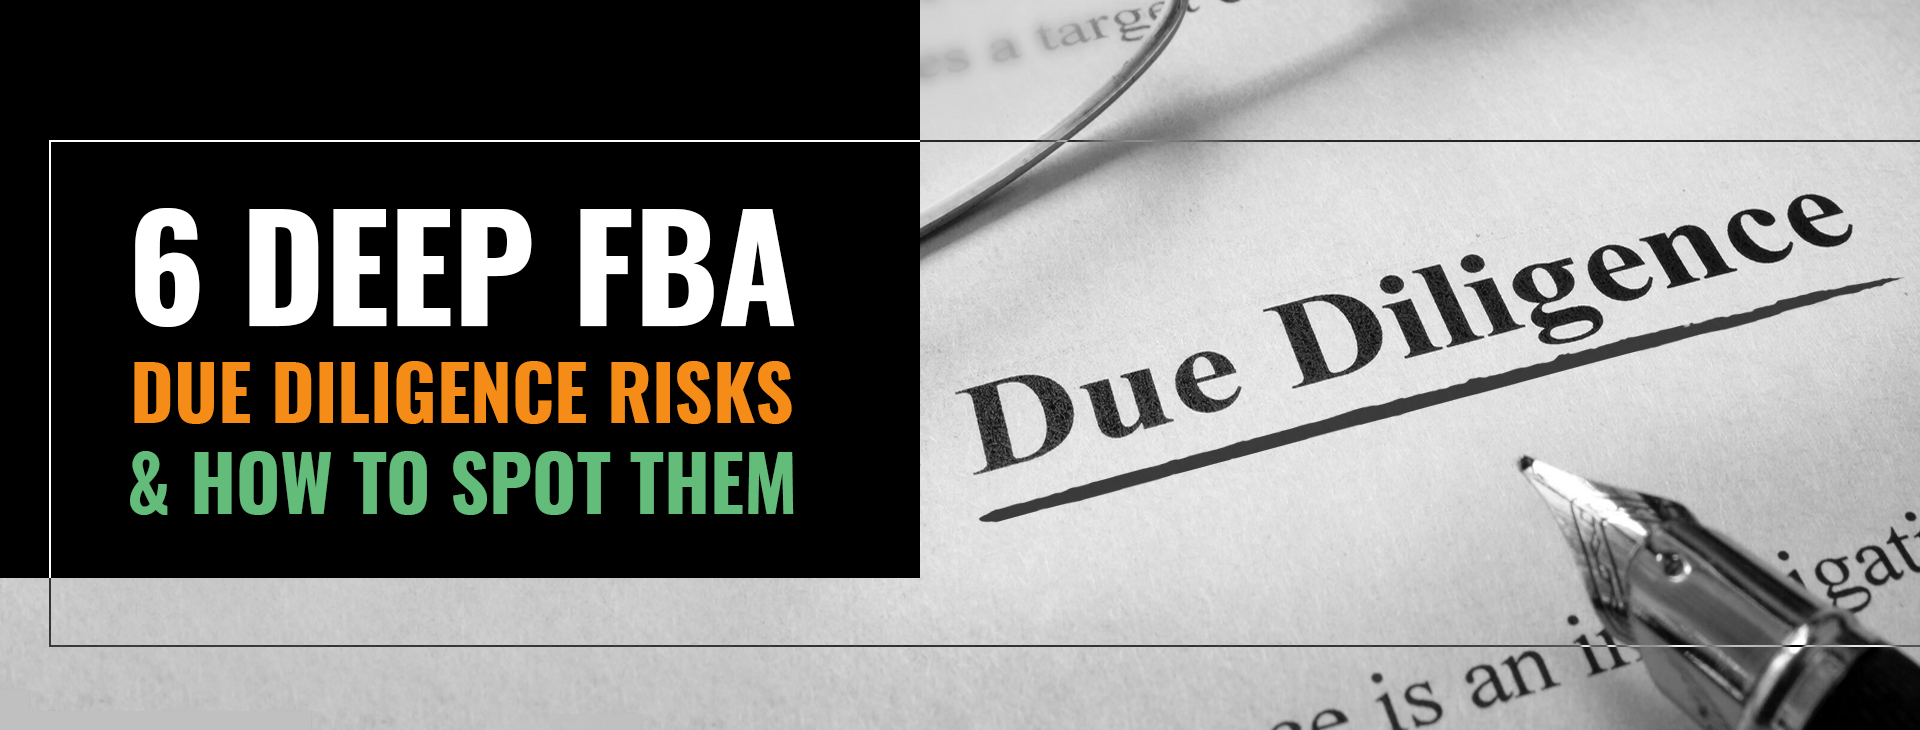 6 Deep FBA Due Diligence Risks & How To Spot Them